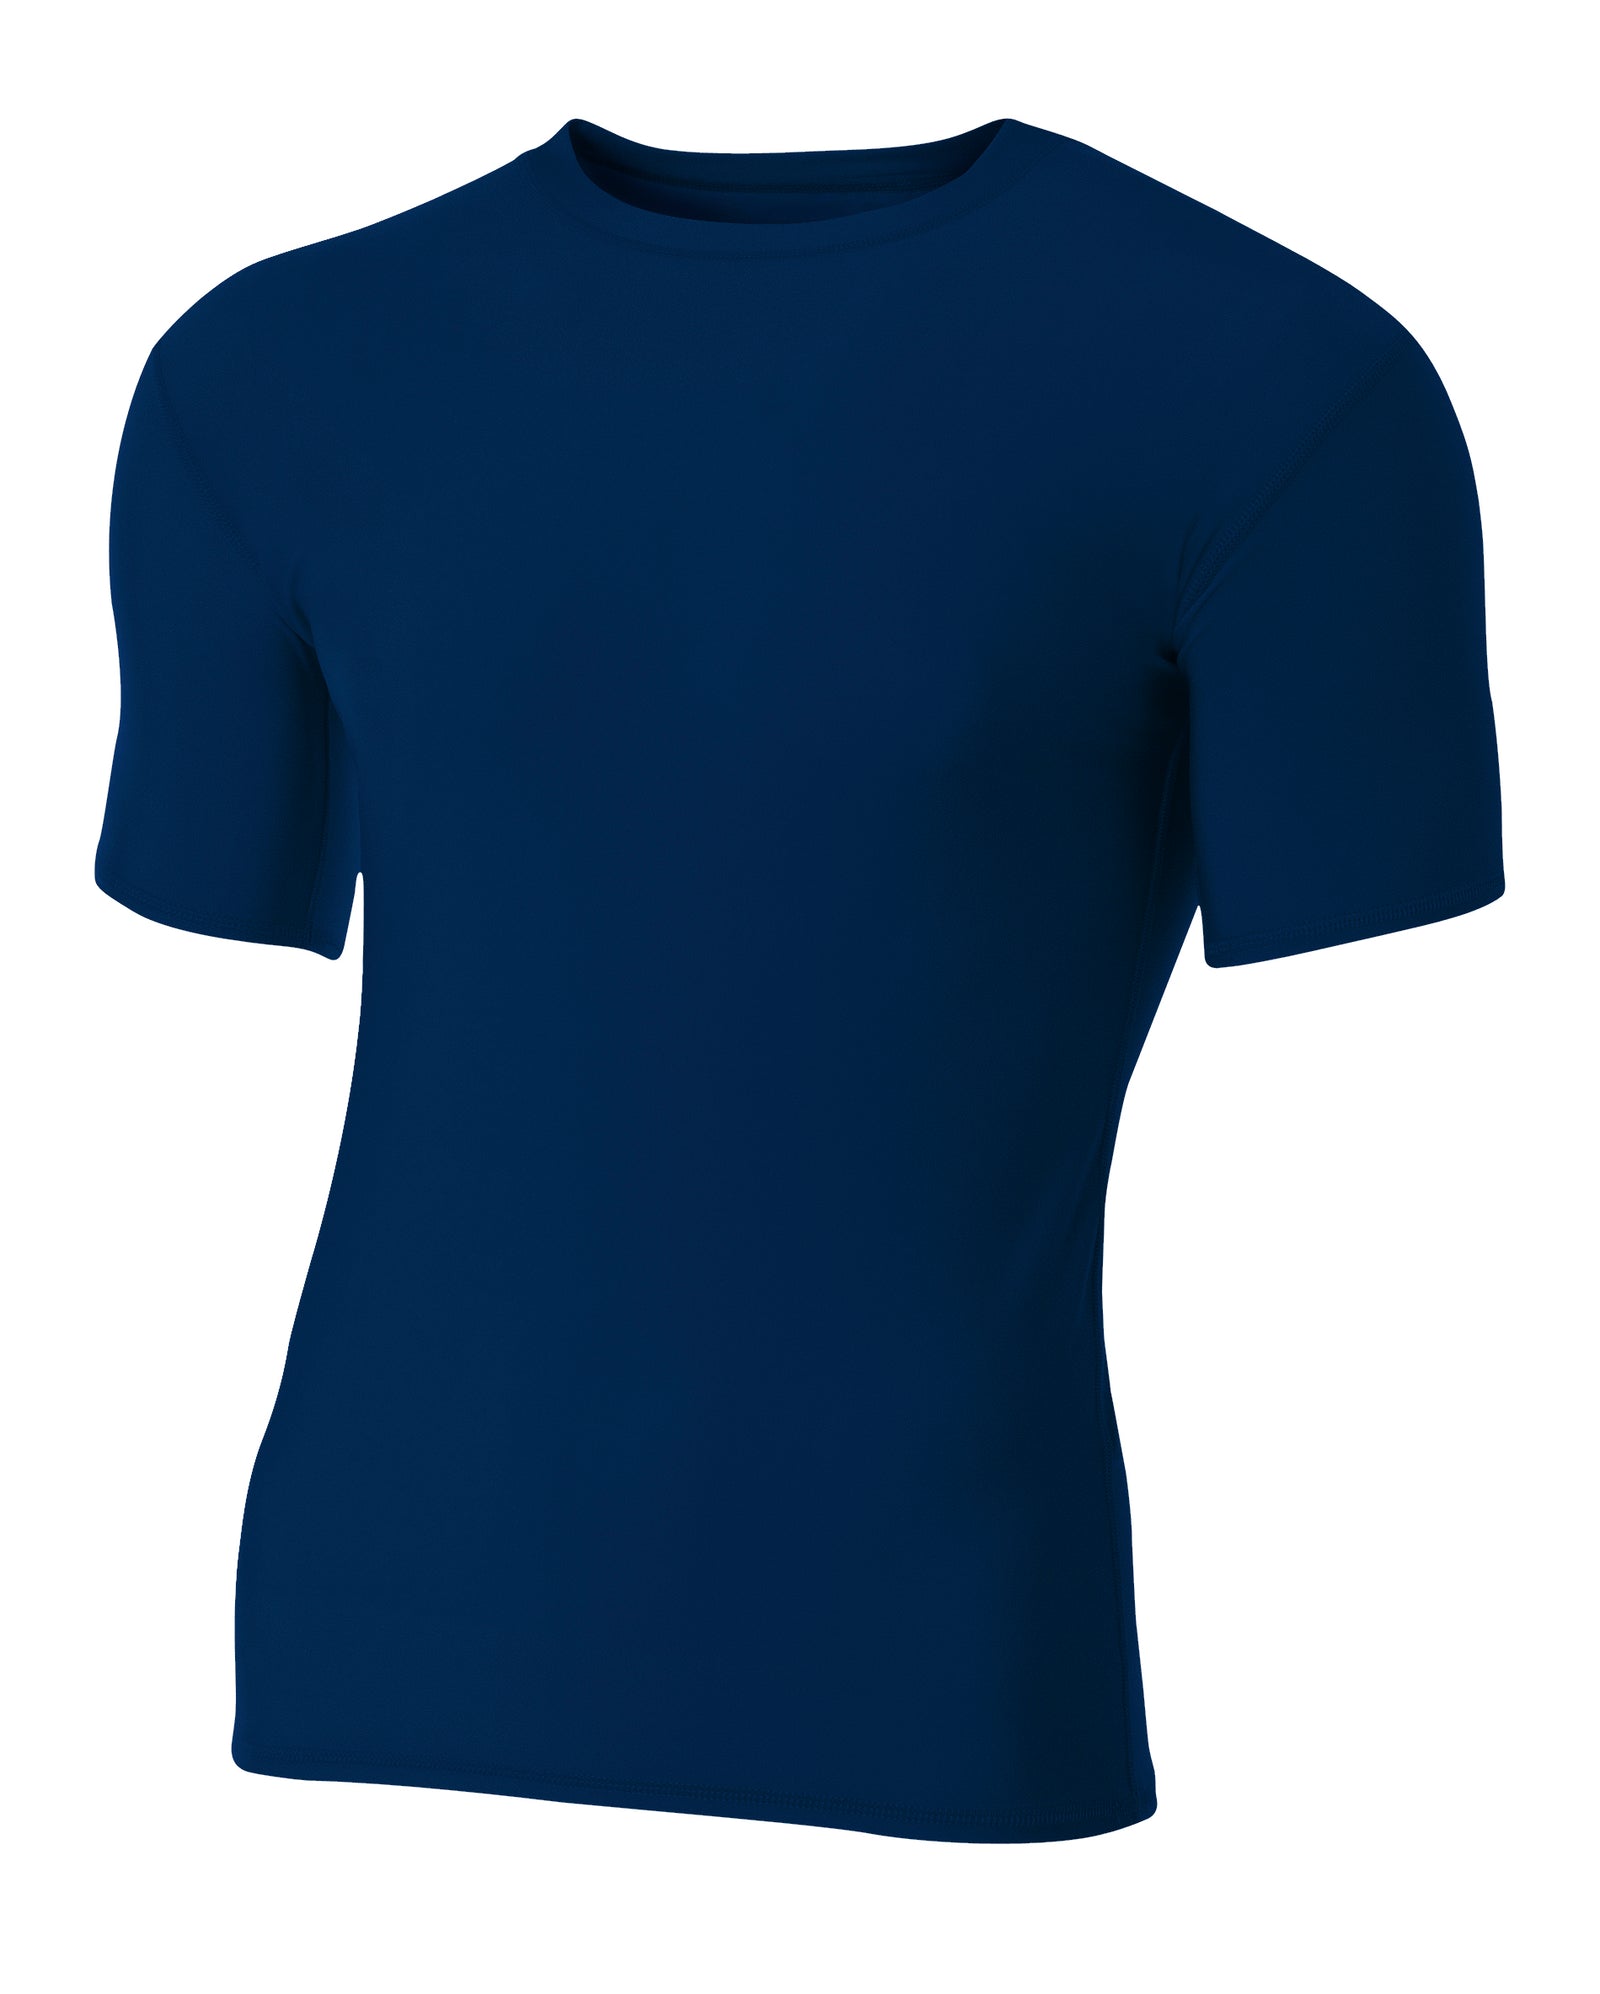 Navy 2011 A4 A4 Youth Short Sleeve Compression Crew